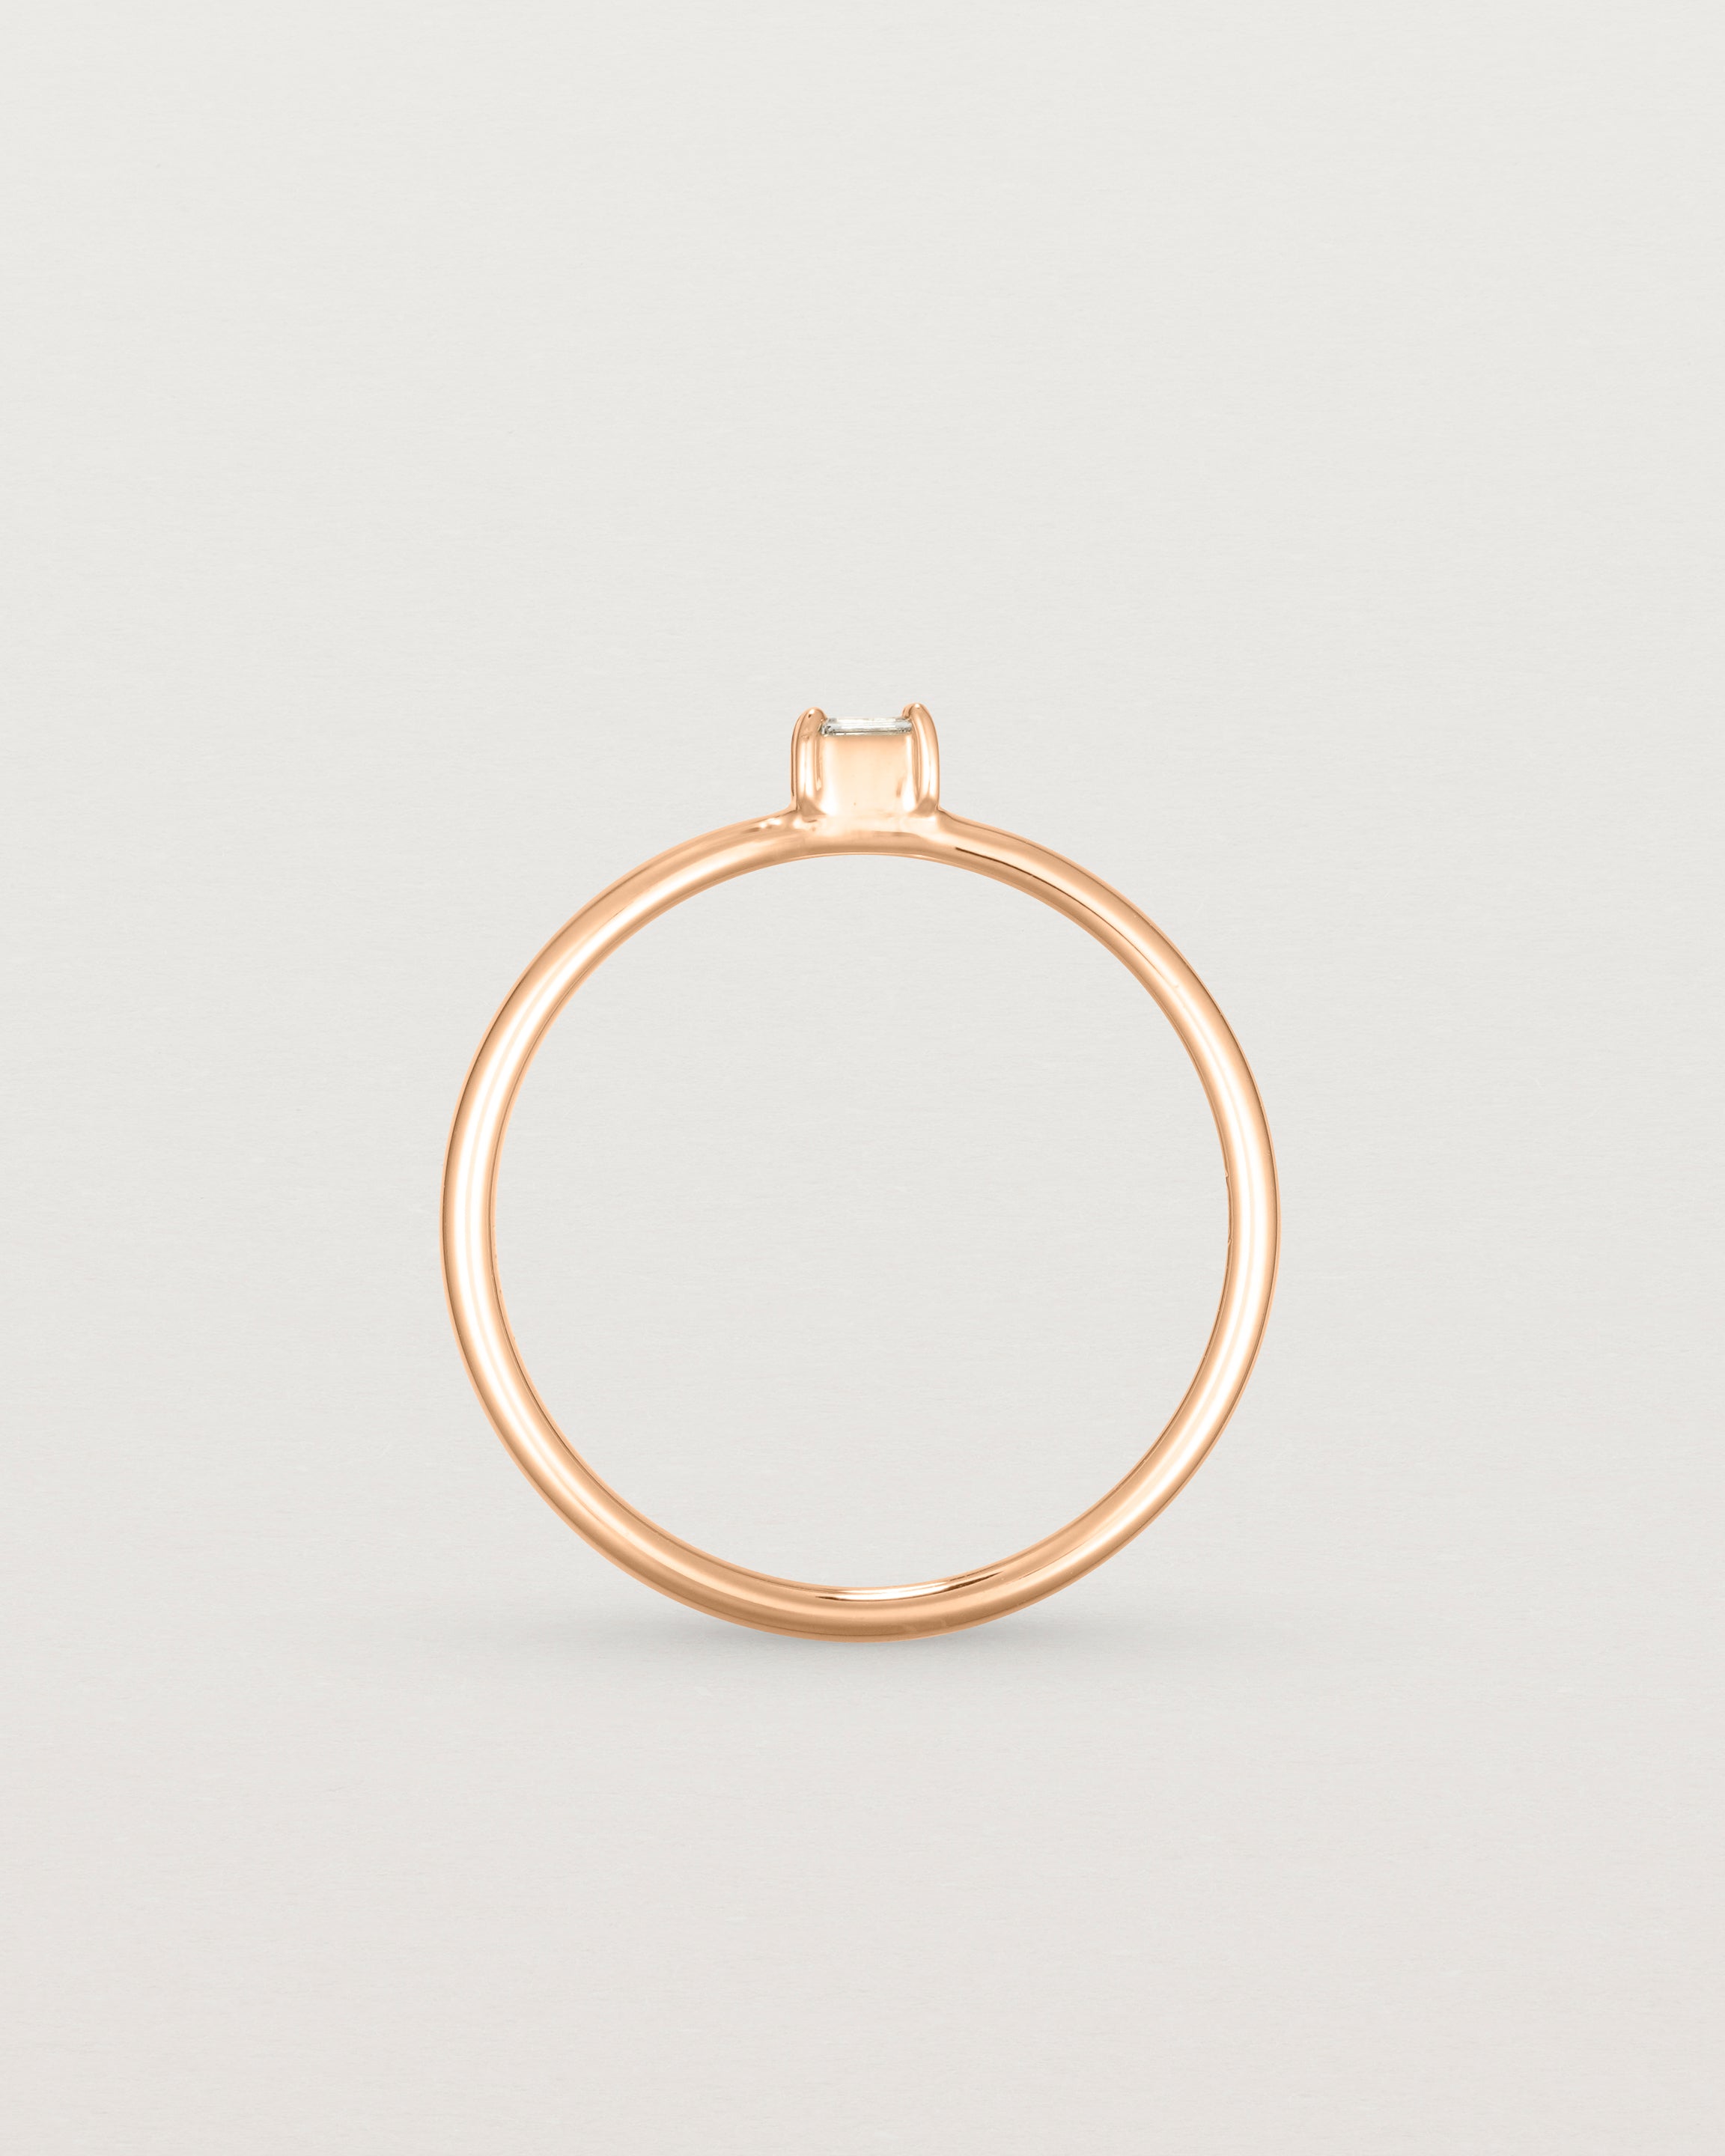 Standing view of the Sena Stacking Ring | Diamond in rose gold.